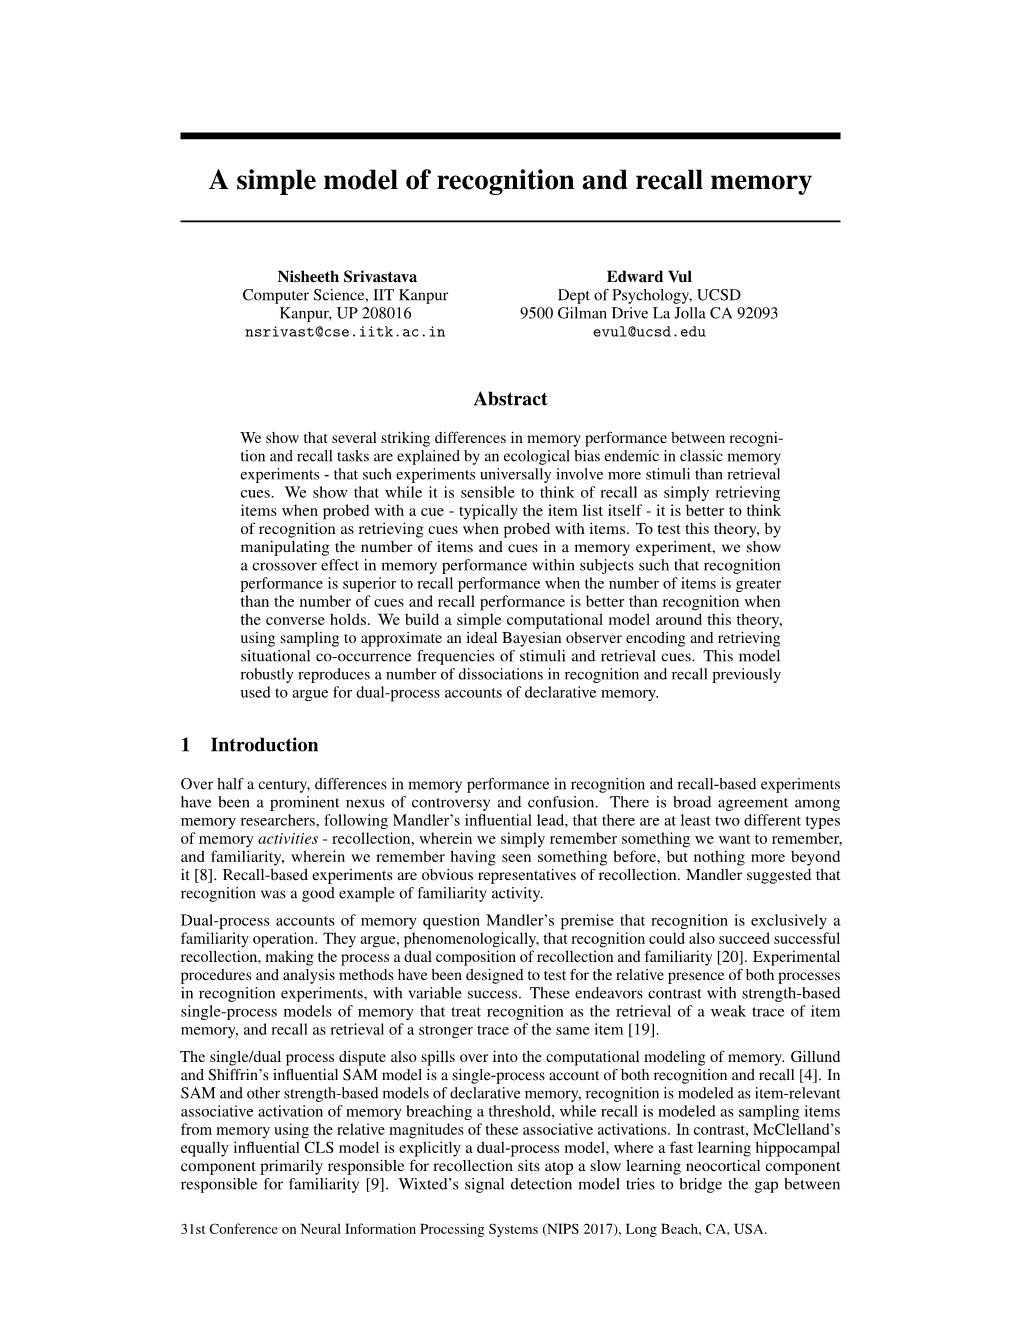 A Simple Model of Recognition and Recall Memory